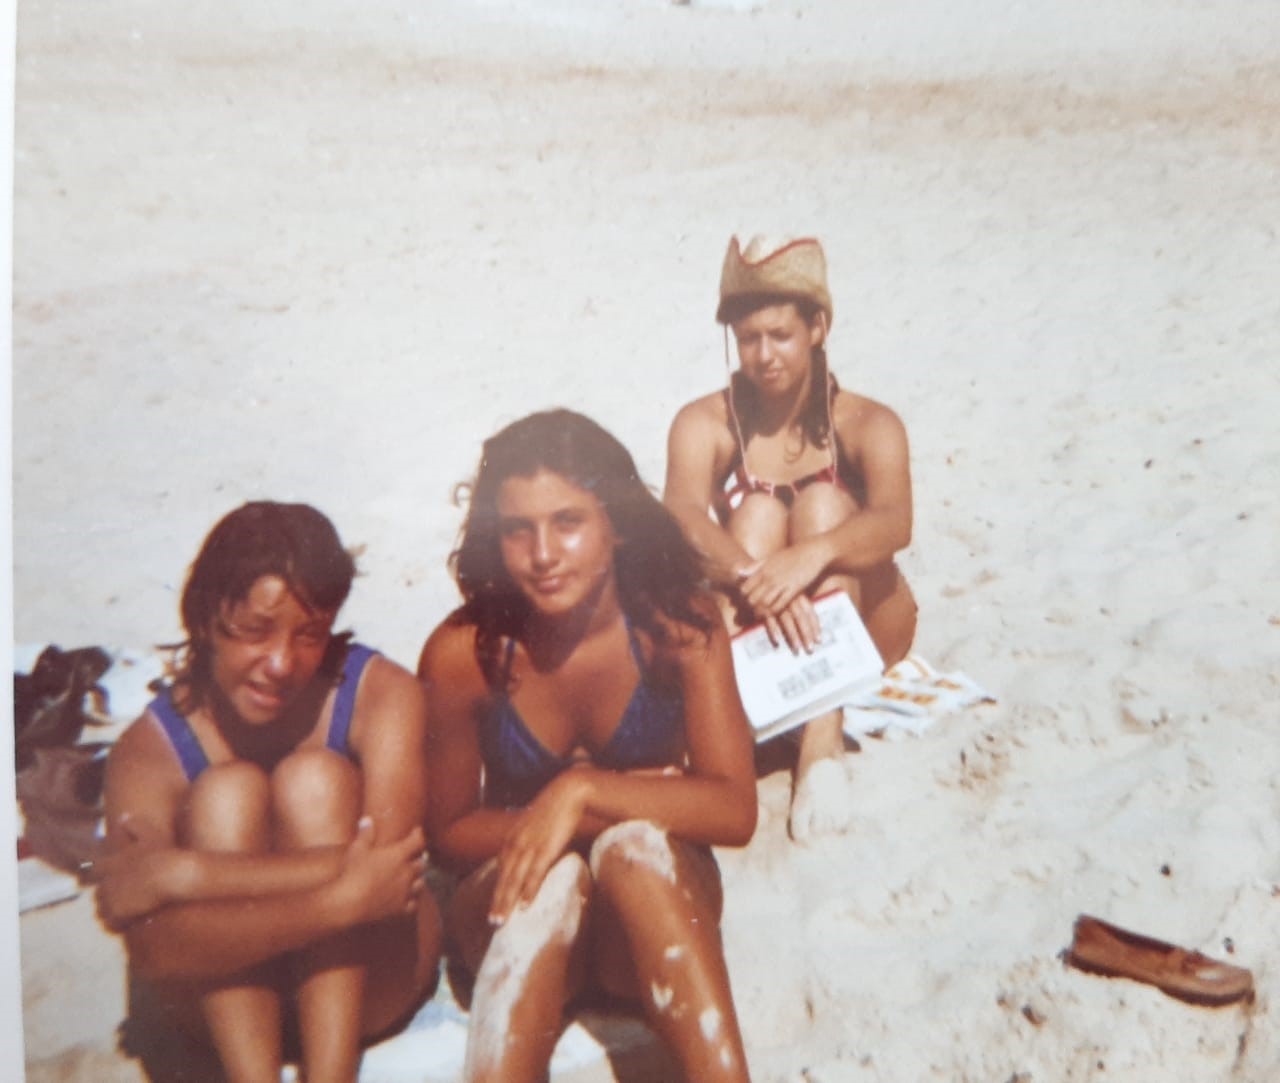 Childhood in Israel, ilana mercer on right, aged 13/14